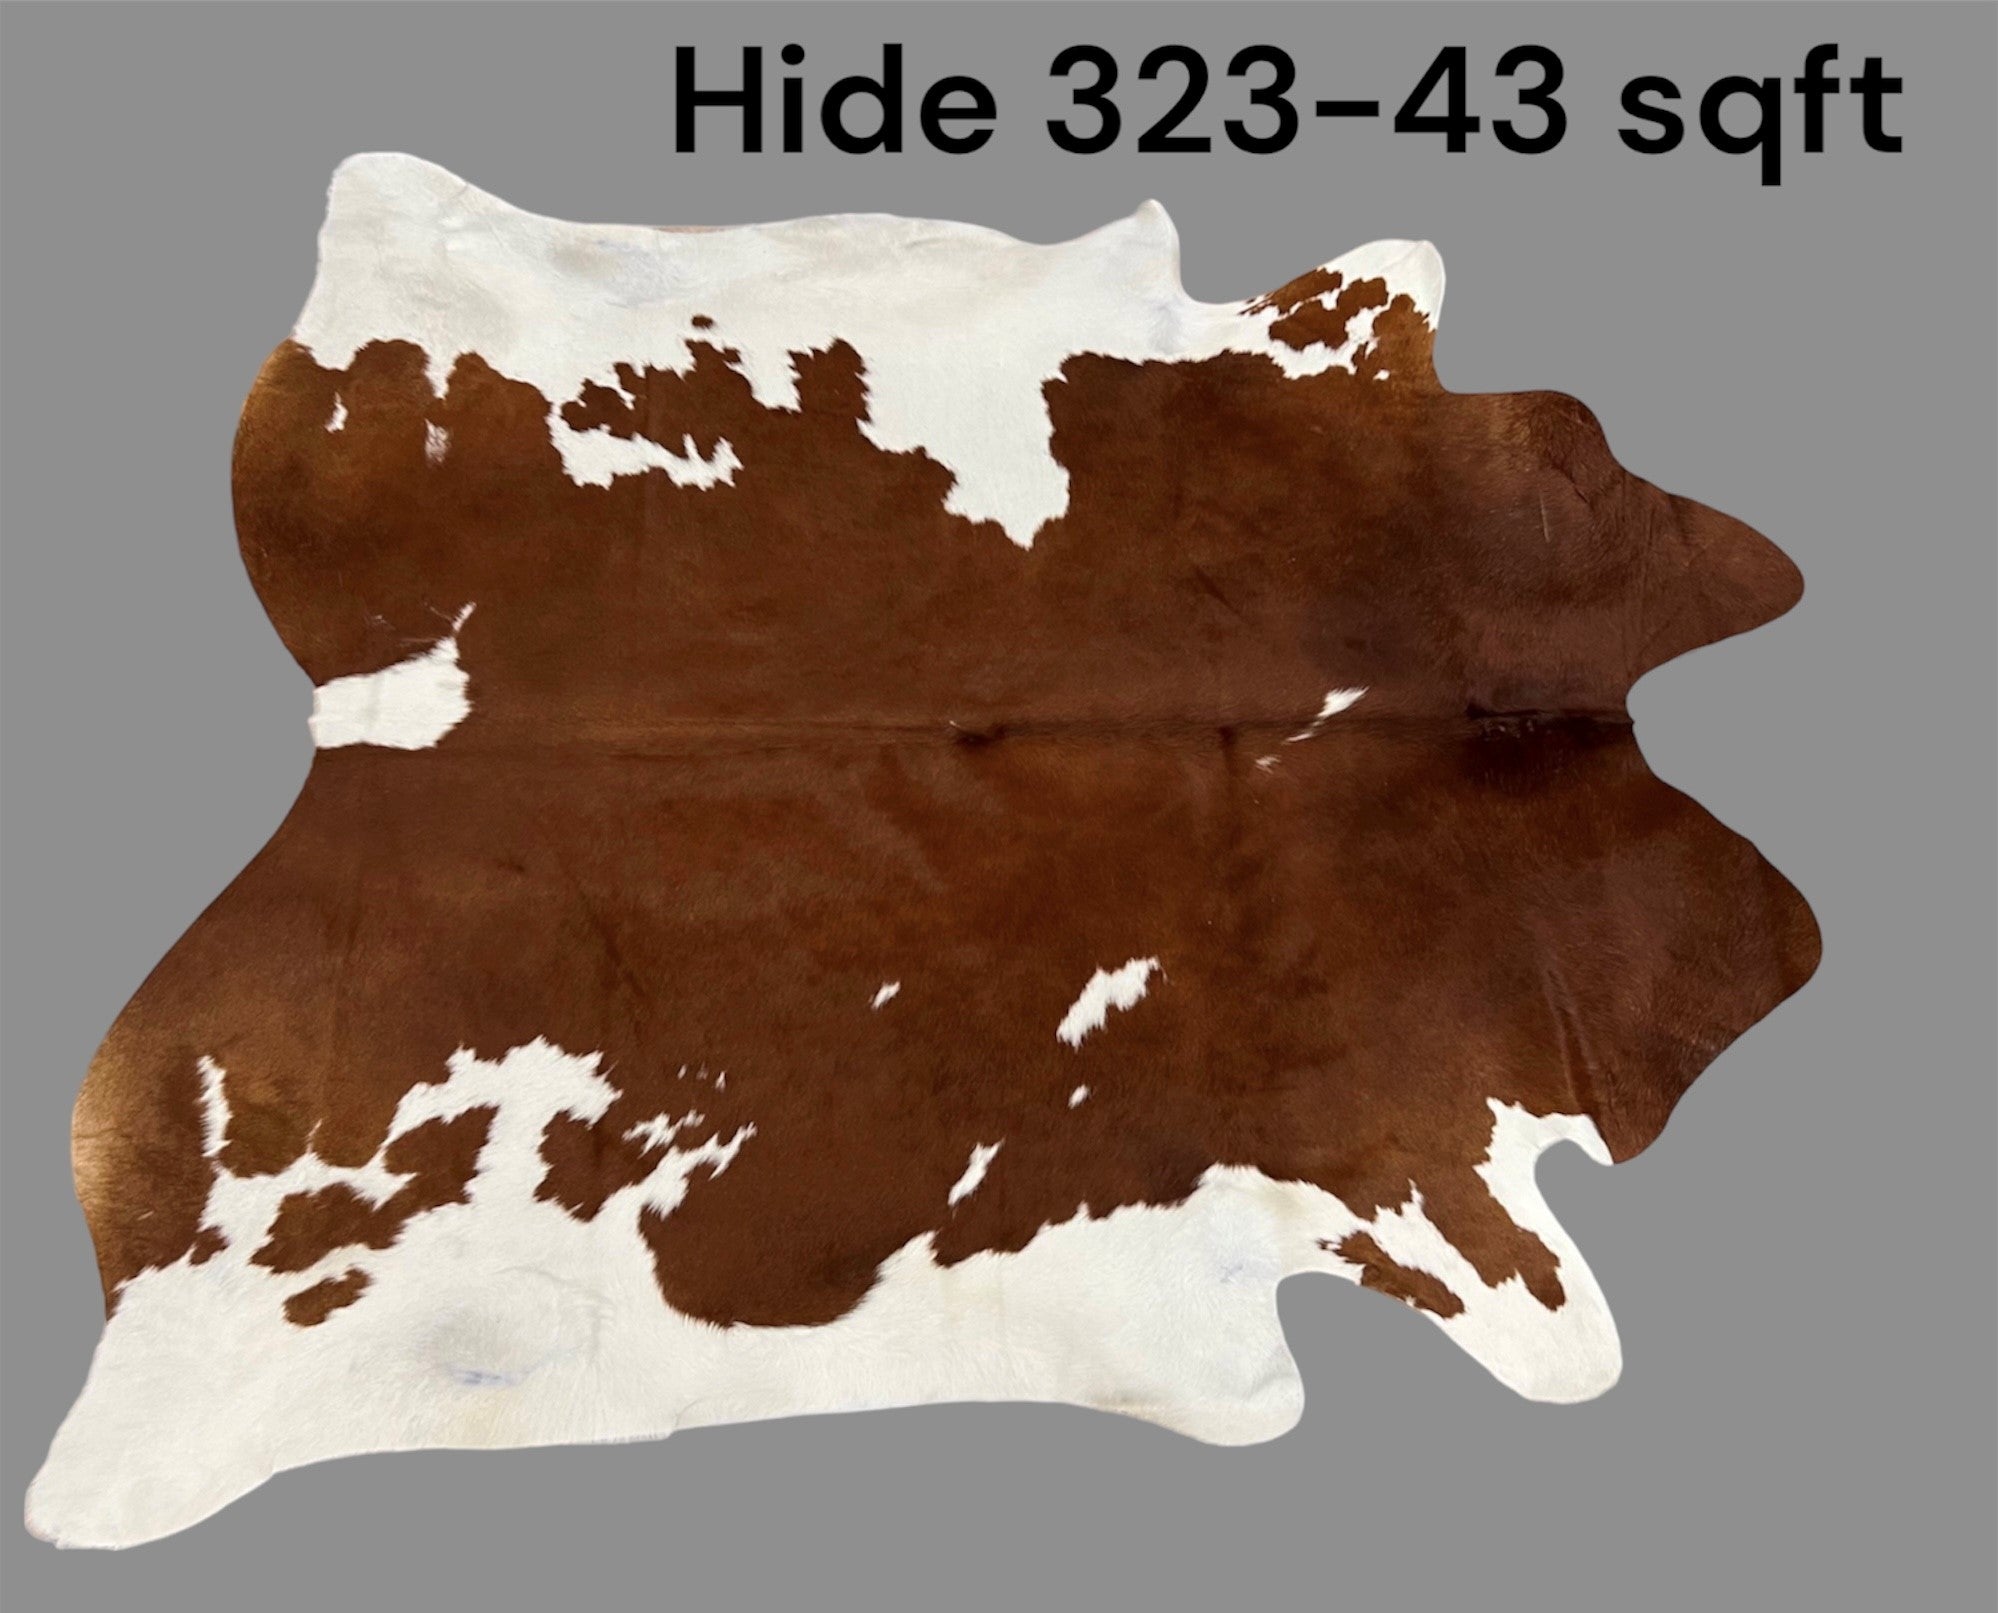 Natural Hair On Cow Hide : This Hide Is Perfect For Wall Hanging, Leather Rugs, Leather Upholstery & Leather Accessories. (Hide323)